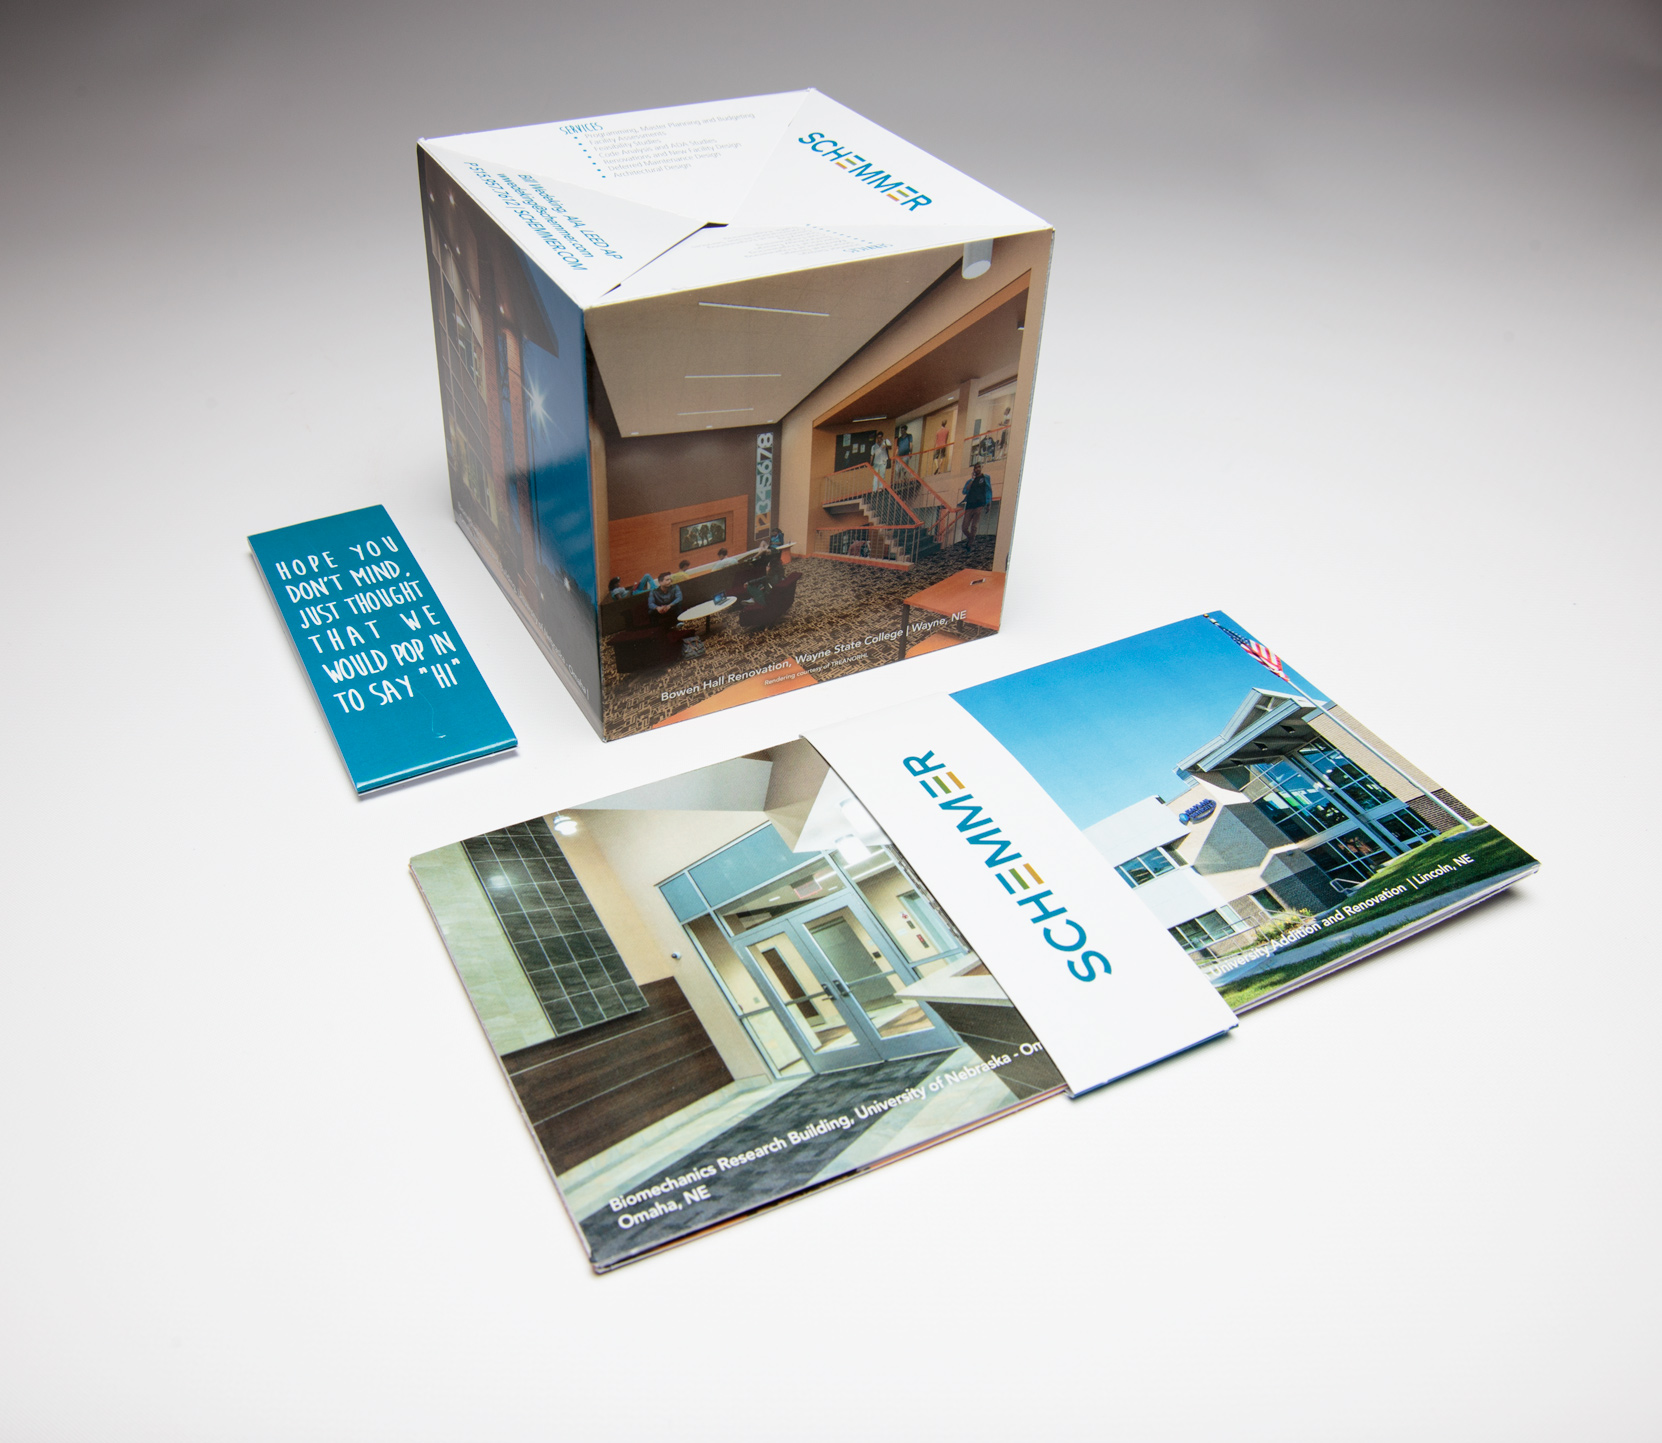 Schemmer Creates Memorable Experience With 4.25" Pop-Up Cube Mailer